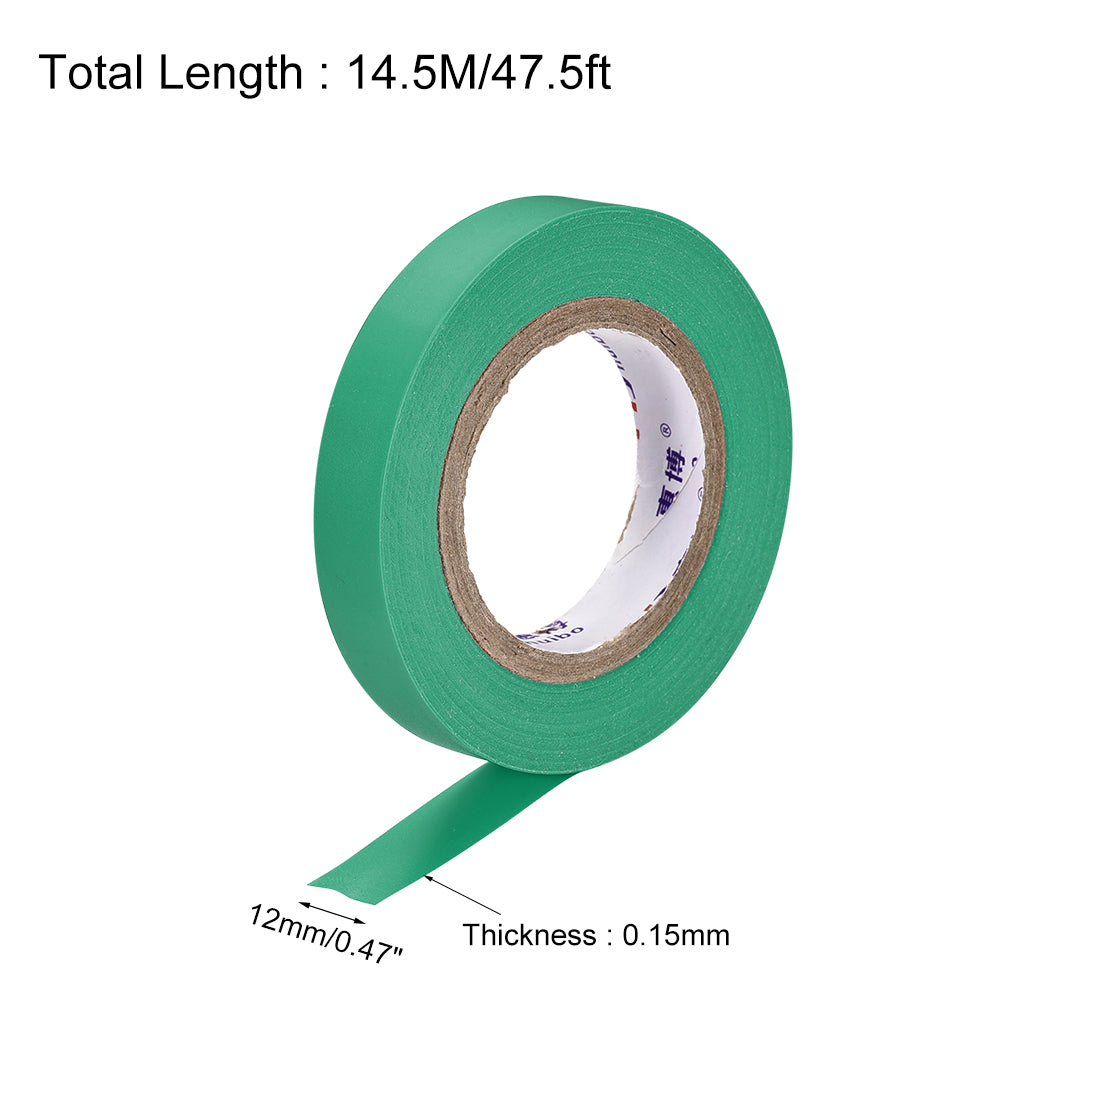 uxcell Uxcell Insulating Tape 12mm Width 14.5M Long 0.15mm Thick PVC Electrical Tape Rated for Max. 400V  80C Use Green 2pcs